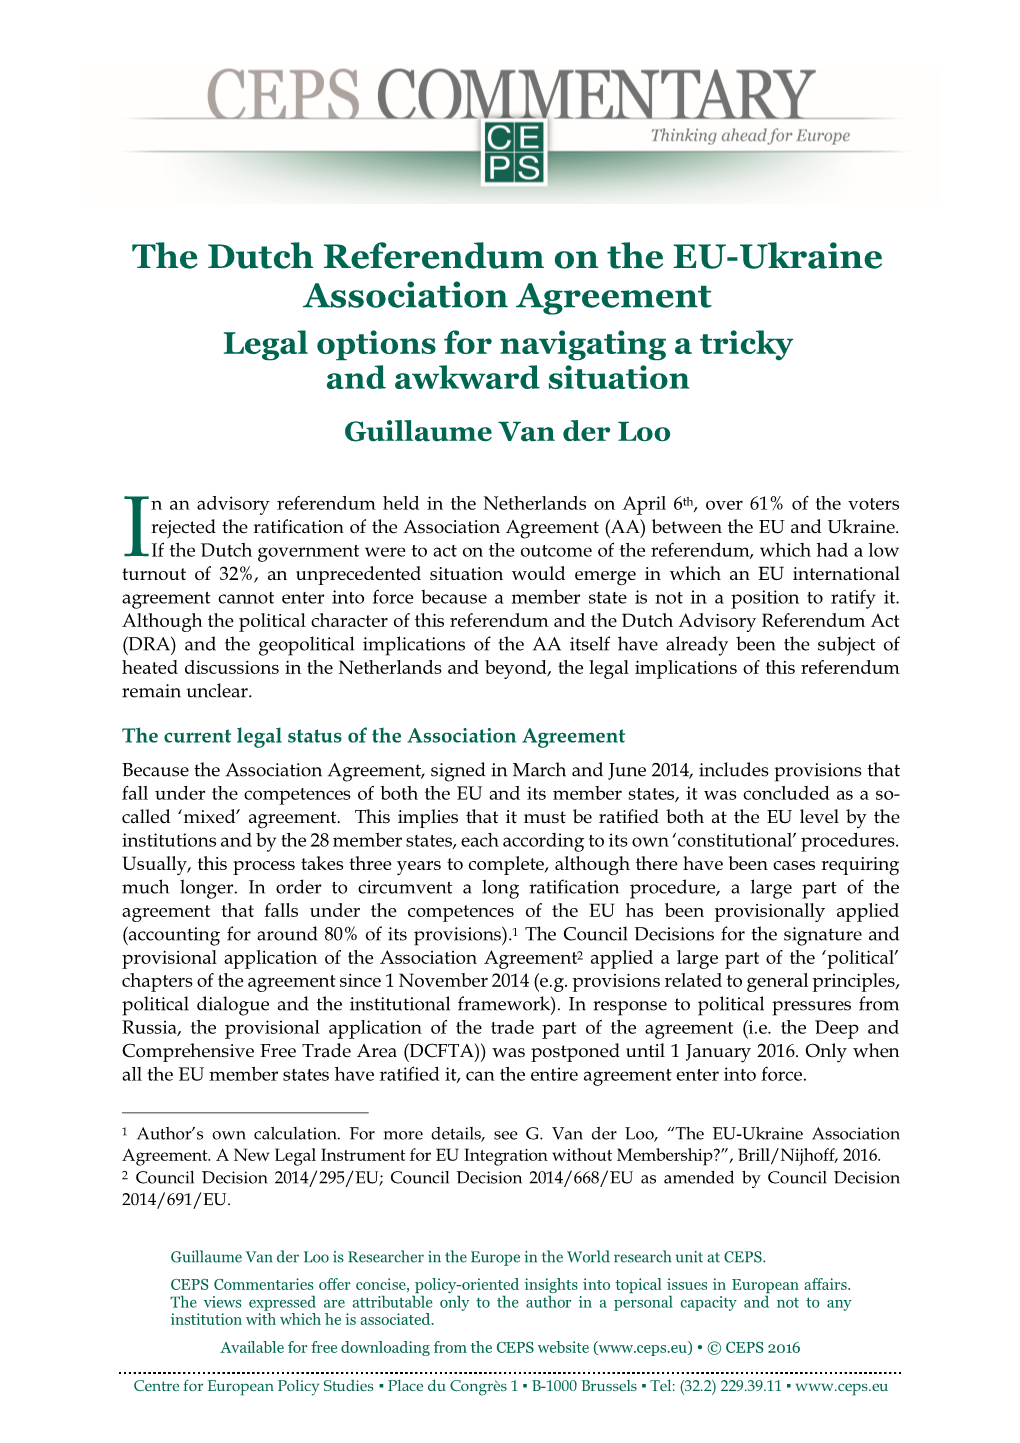 The Dutch Referendum on the EU-Ukraine Association Agreement Legal Options for Navigating a Tricky and Awkward Situation Guillaume Van Der Loo